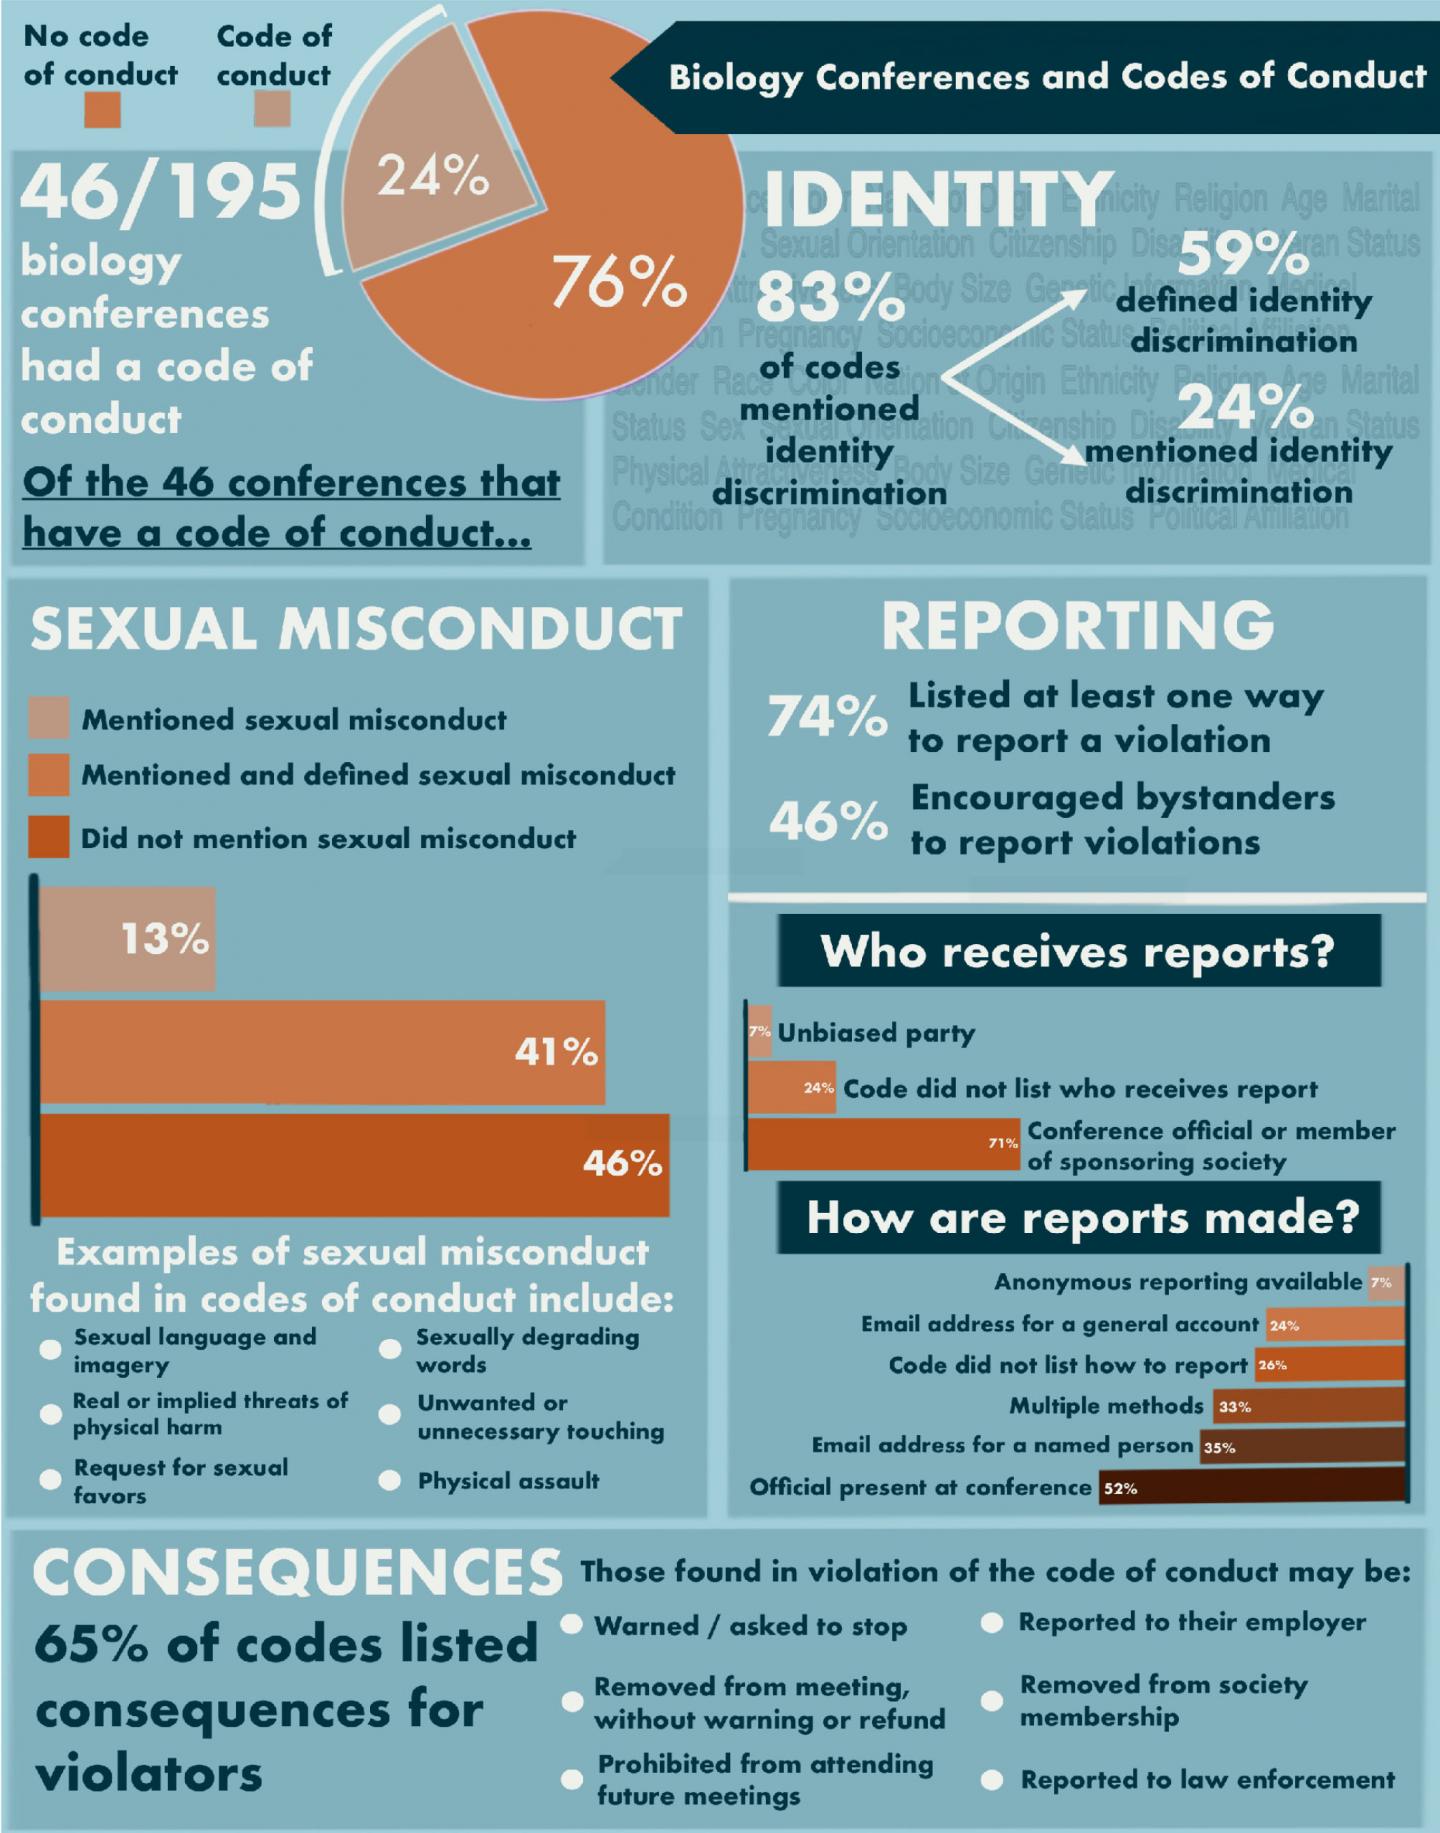 Breakdown of Studied Conferences Codes of Conduct